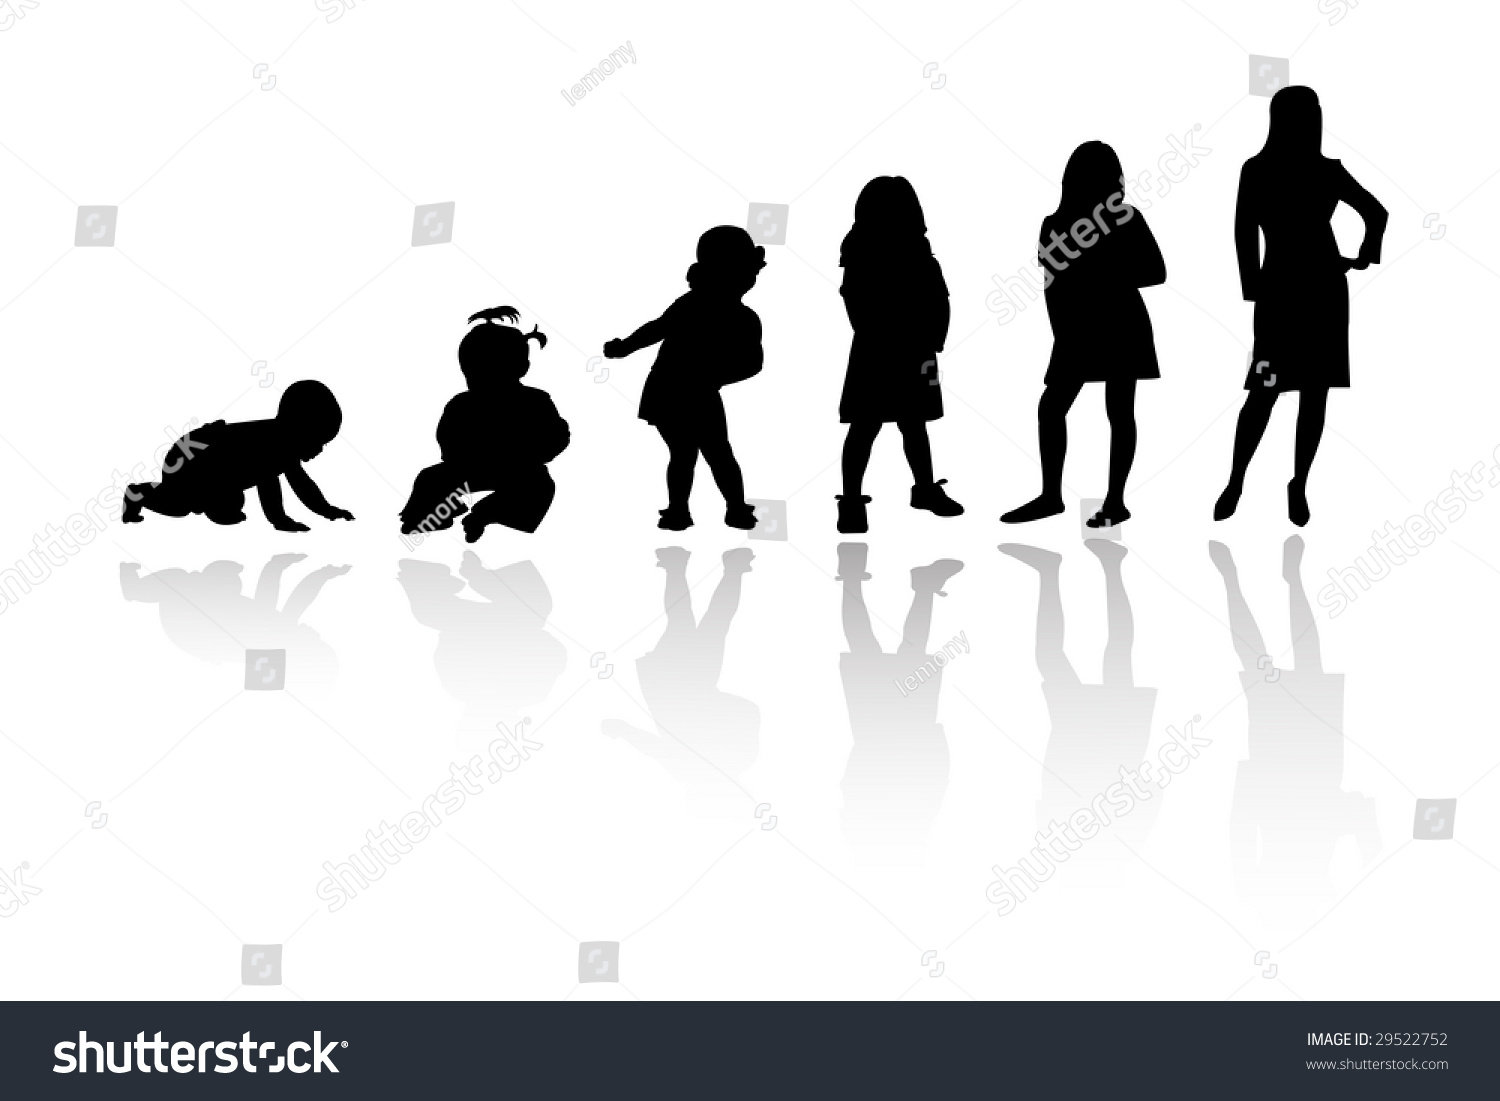 7,443 Child growth silhouette Images, Stock Photos & Vectors | Shutterstock